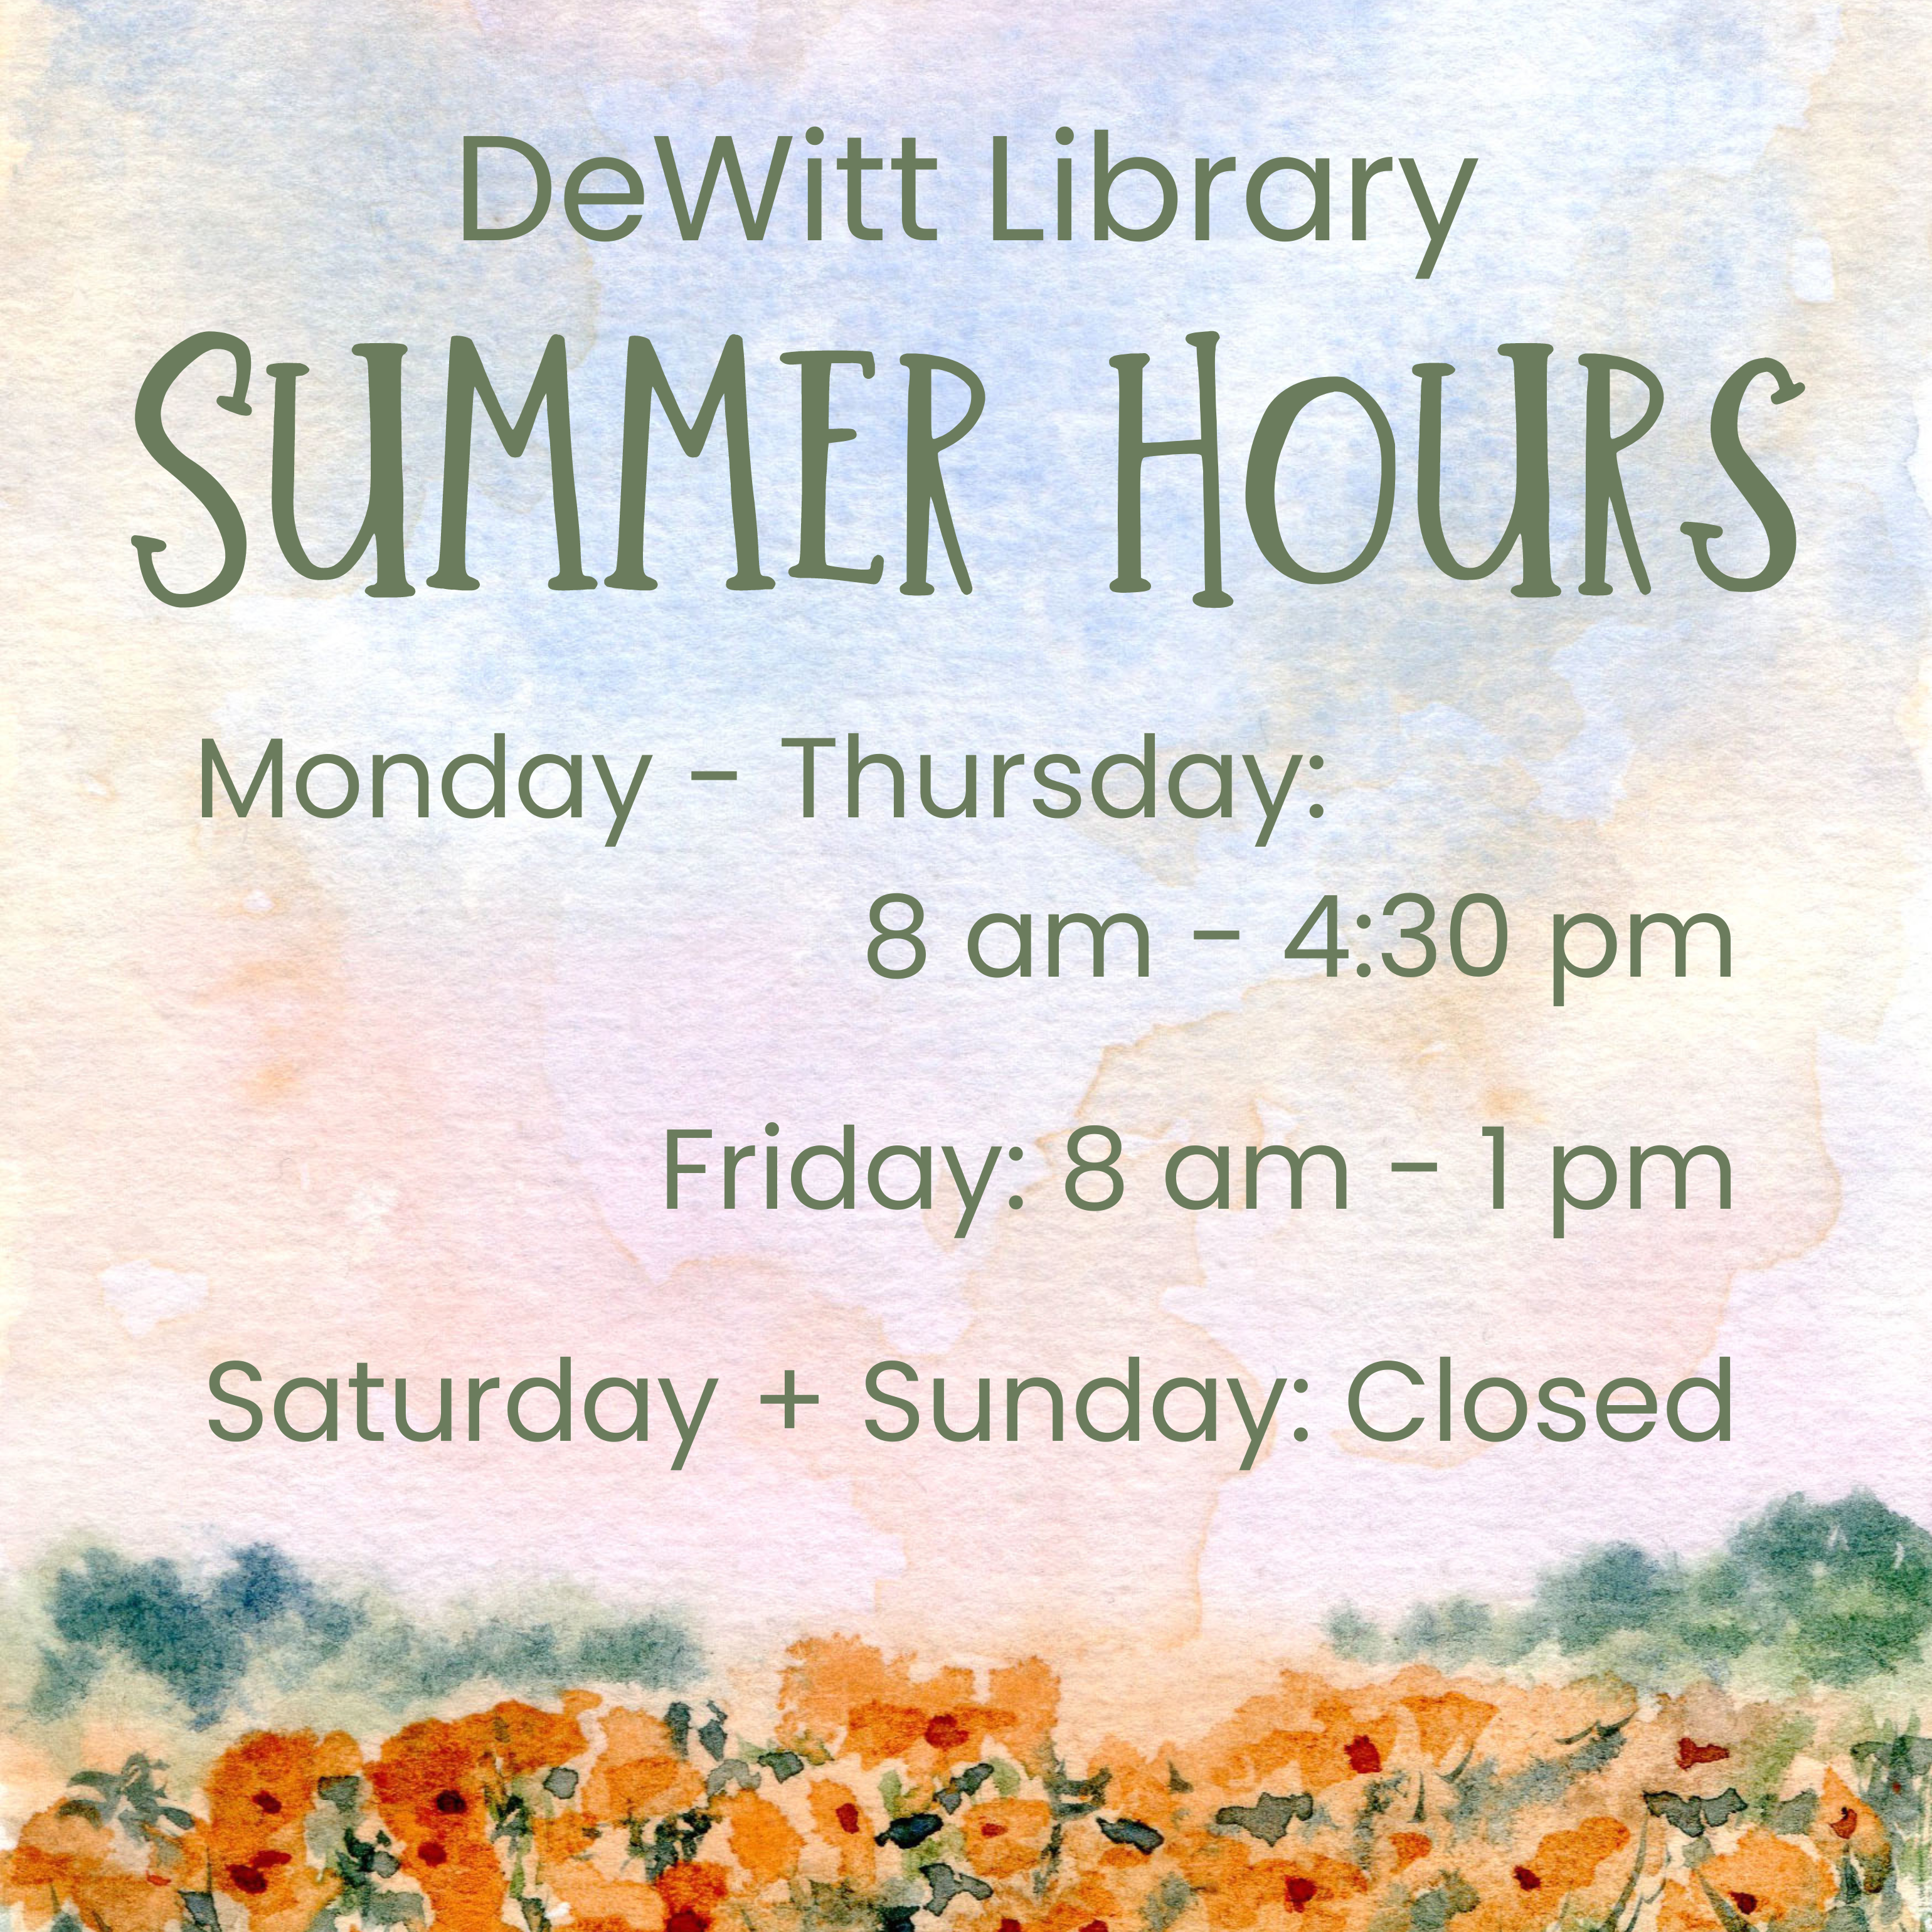 DeWitt Library Summer Hours: Monday: 8 am - 4:30 pm;  Tuesday: 8 am - 4:30 pm;  Wednesday: 8 am - 4:30 pm;  Thursday:	8 am - 4:30 pm;  Friday:	8 am - 1 pm;  Saturday: Closed;  Sunday: Closed.